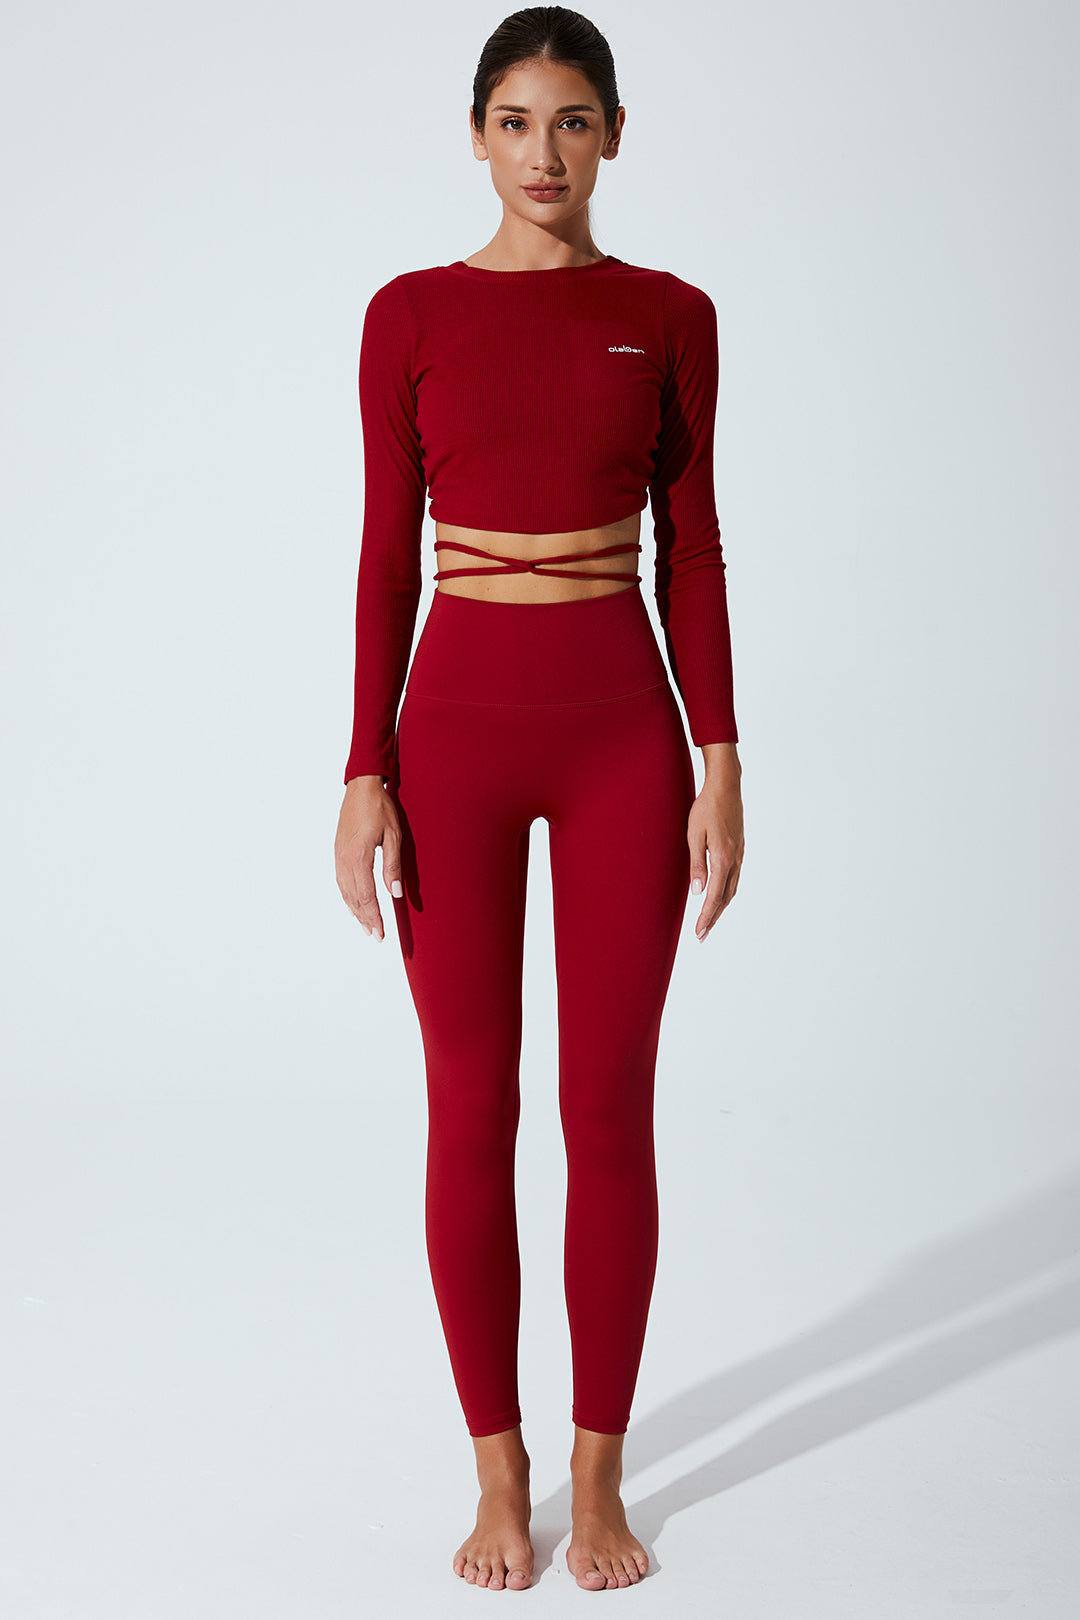 Stylish red burgundy women's long sleeve top with an elegant archangel design - OW-0016-WLS-RD.